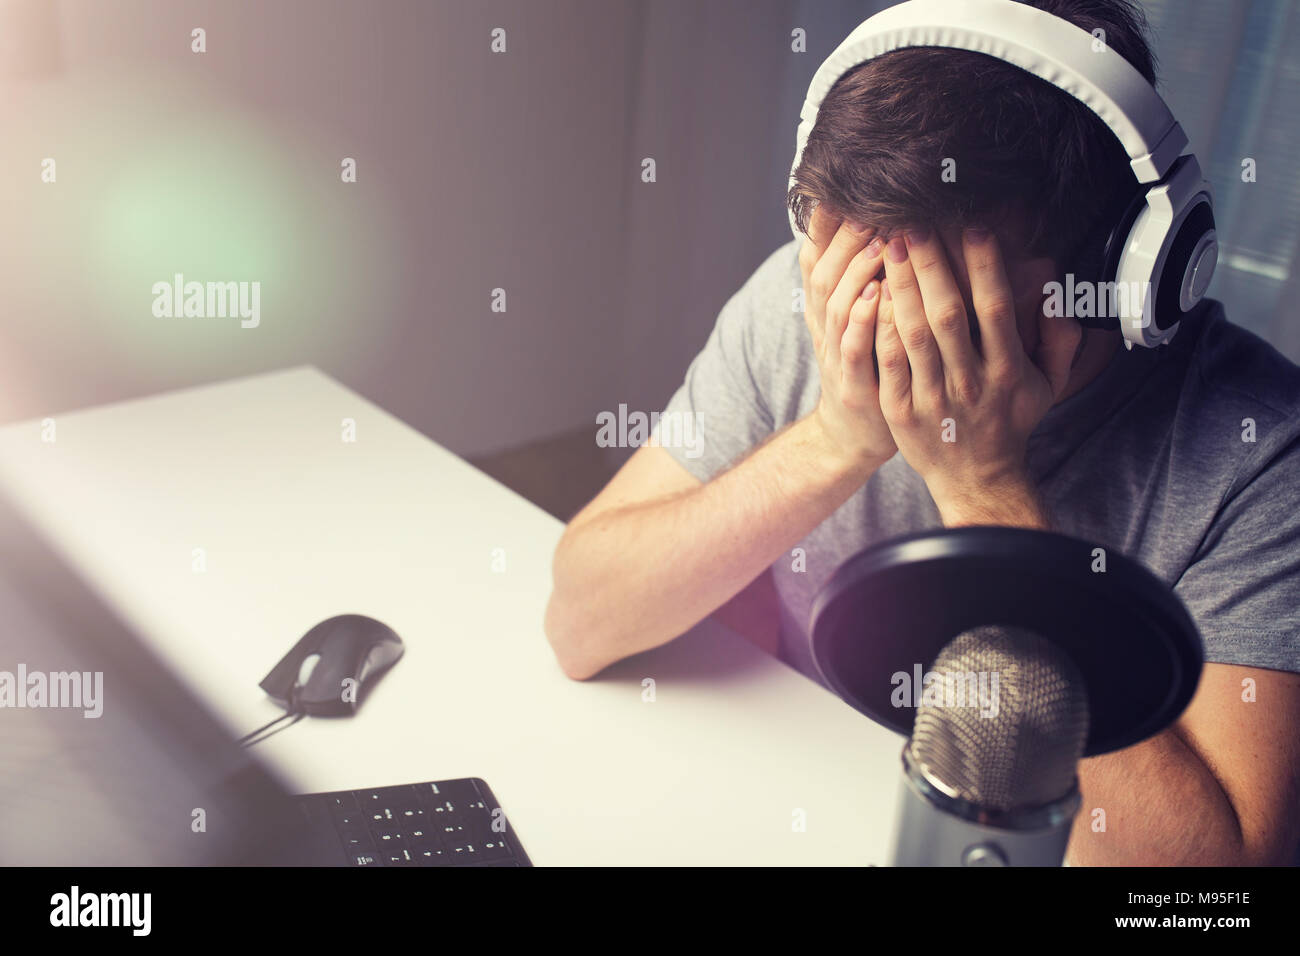 close up of man losing computer video game Stock Photo